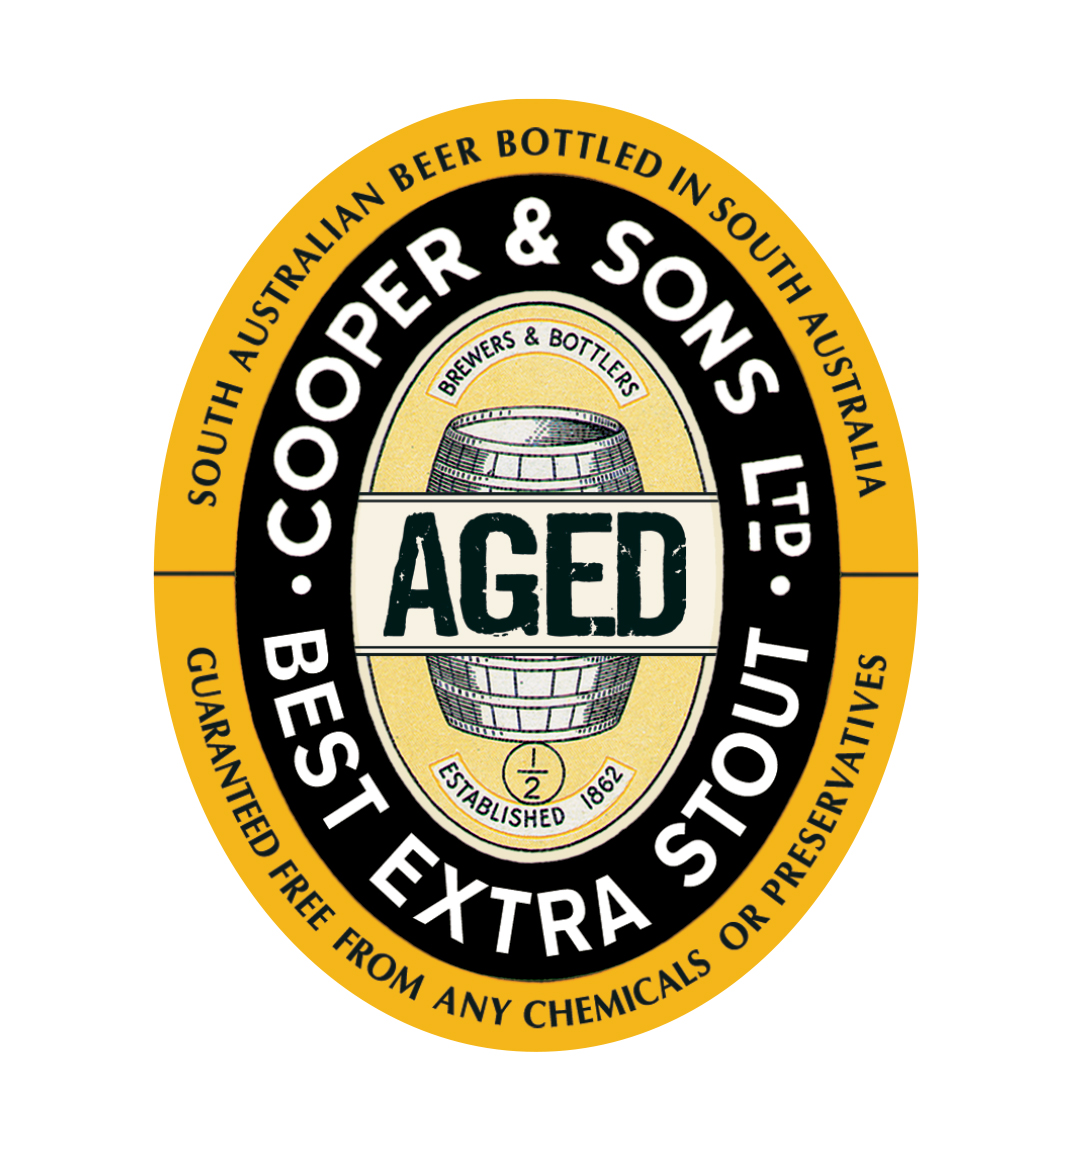 Coopers Aged Stout